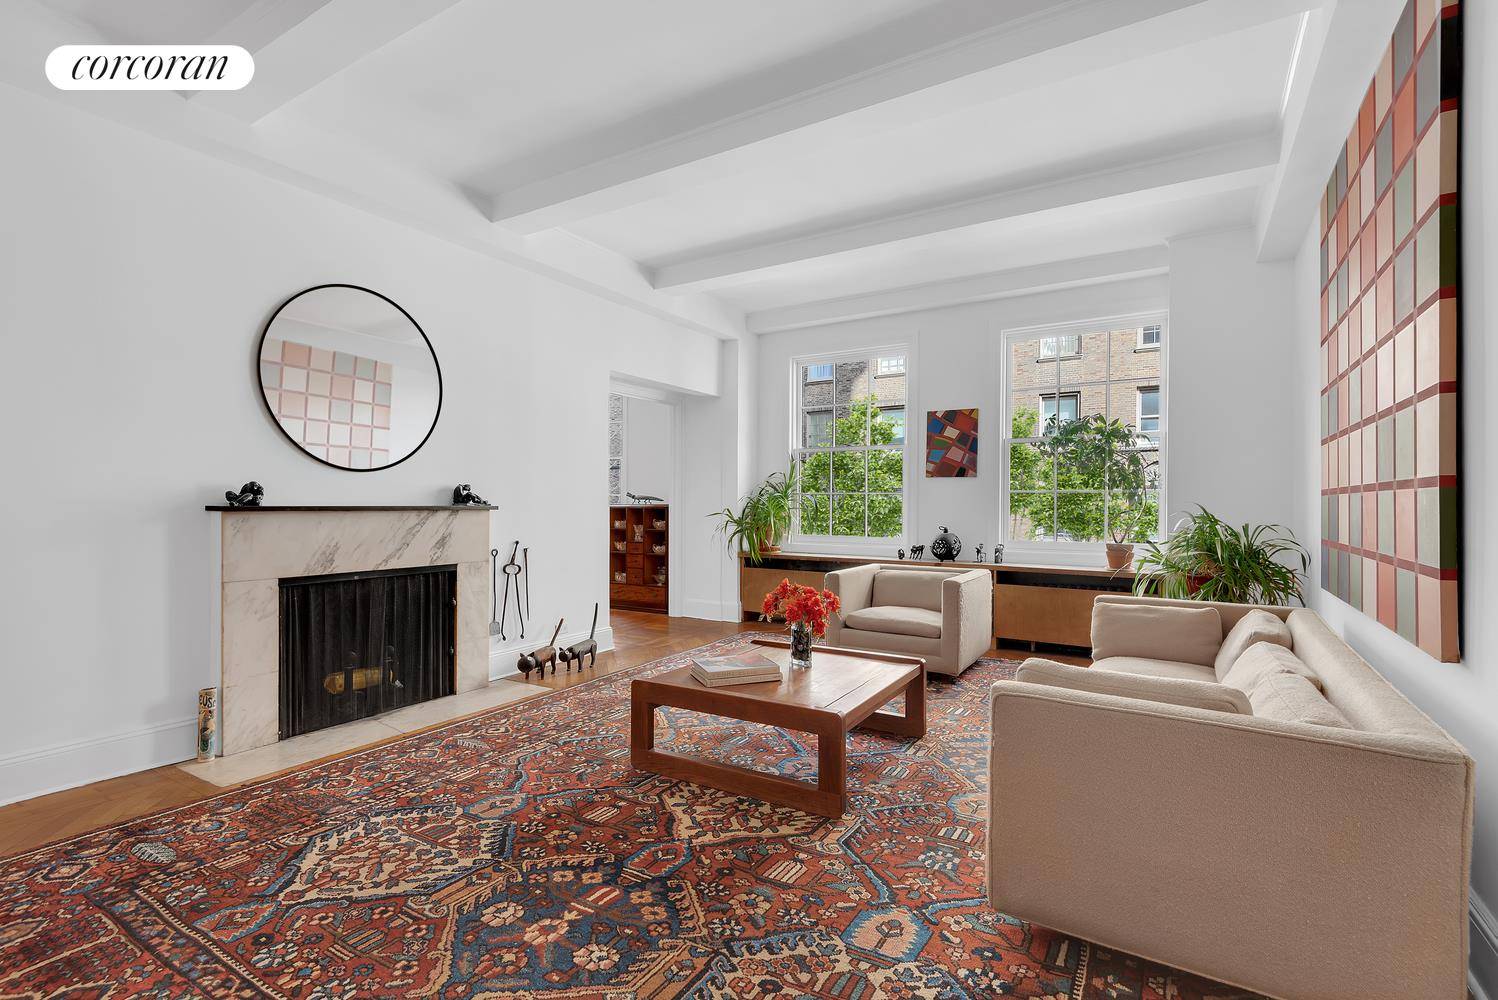 Apartment 5C at 1165 Fifth Avenue is an elegant, bright, and well proportioned 8 room home located in the heart of Carnegie Hill.